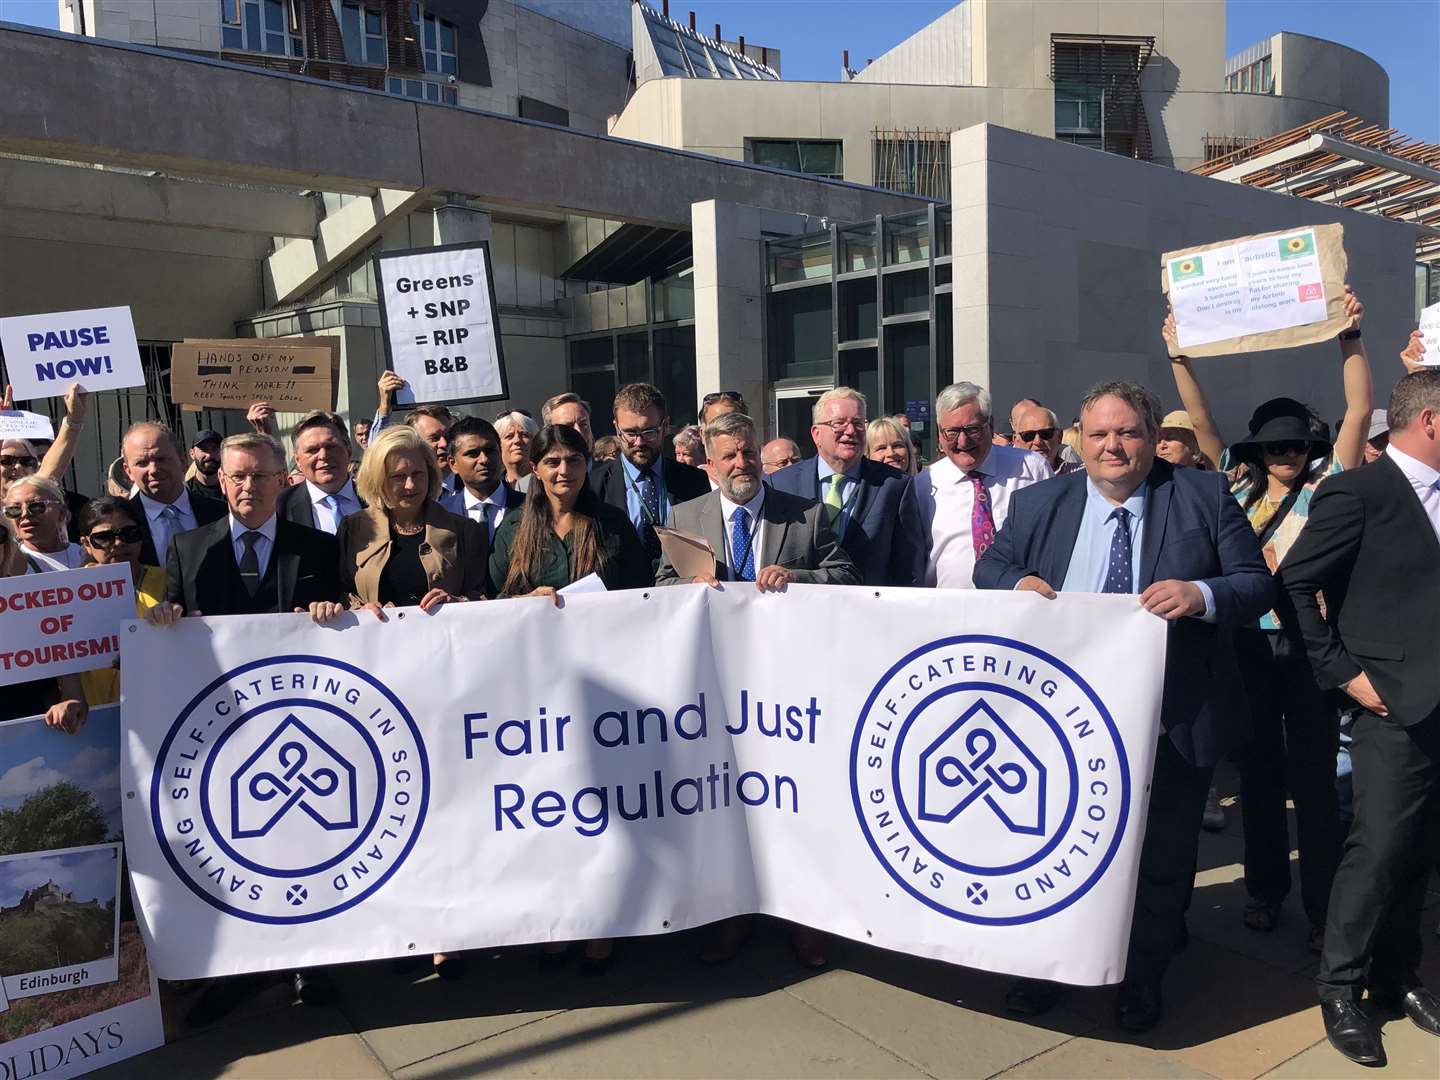 Jamie Halcro Johnston said: "I was pleased to stand with protesters outside the Scottish Parliament. Each one of them has a story that deserves to be heard."